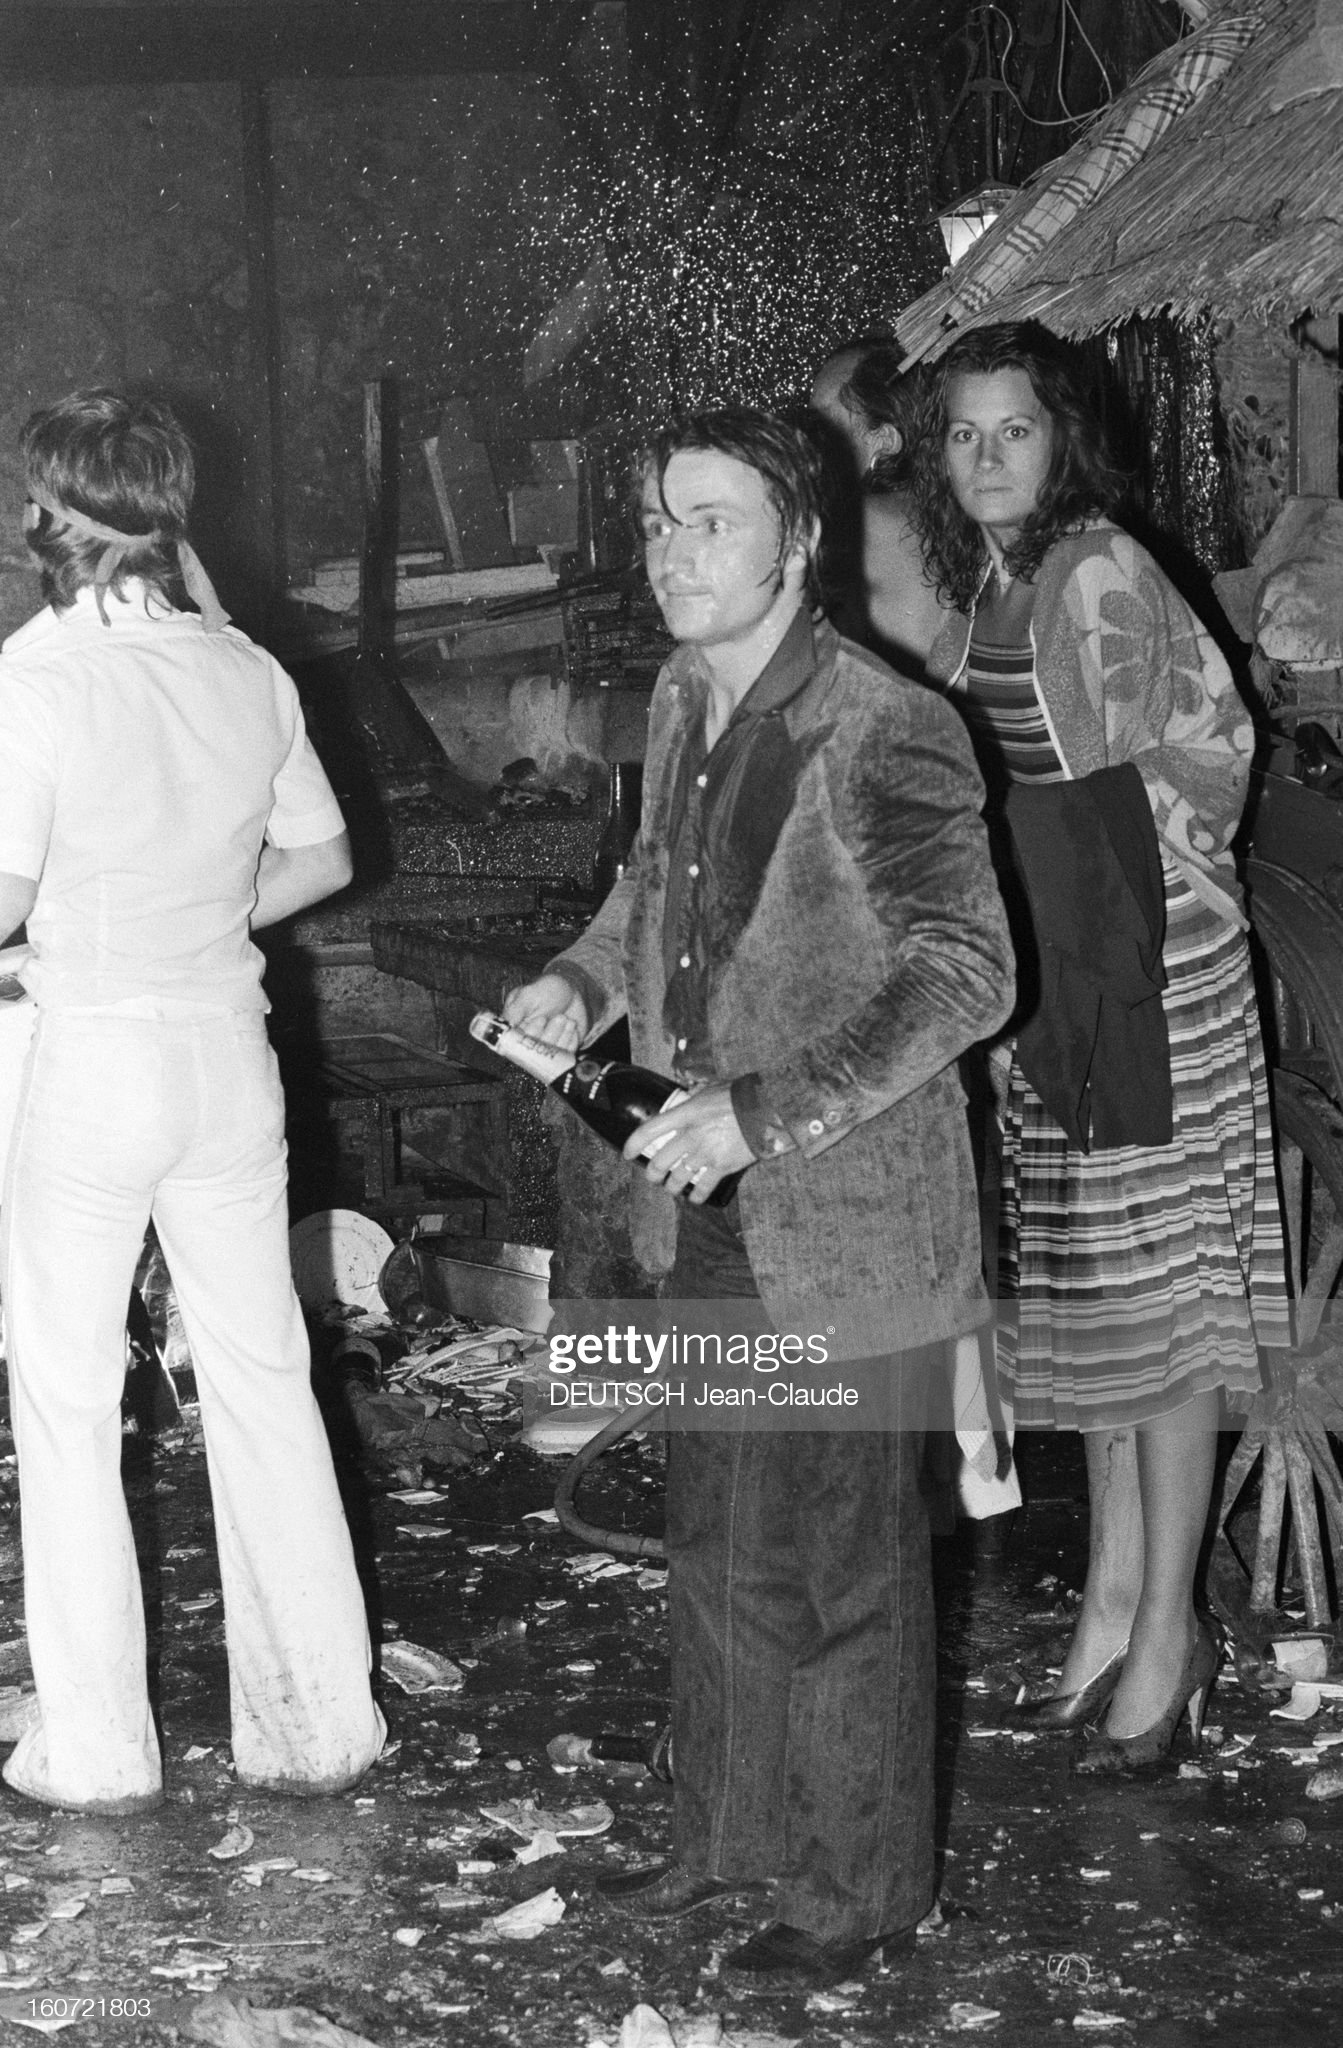 On May 18, 1980, during the Monaco Formula 1 Grand Prix, René Arnoux with his wife Kelly at a party at the 'New Jimmy's' in Monte-Carlo.